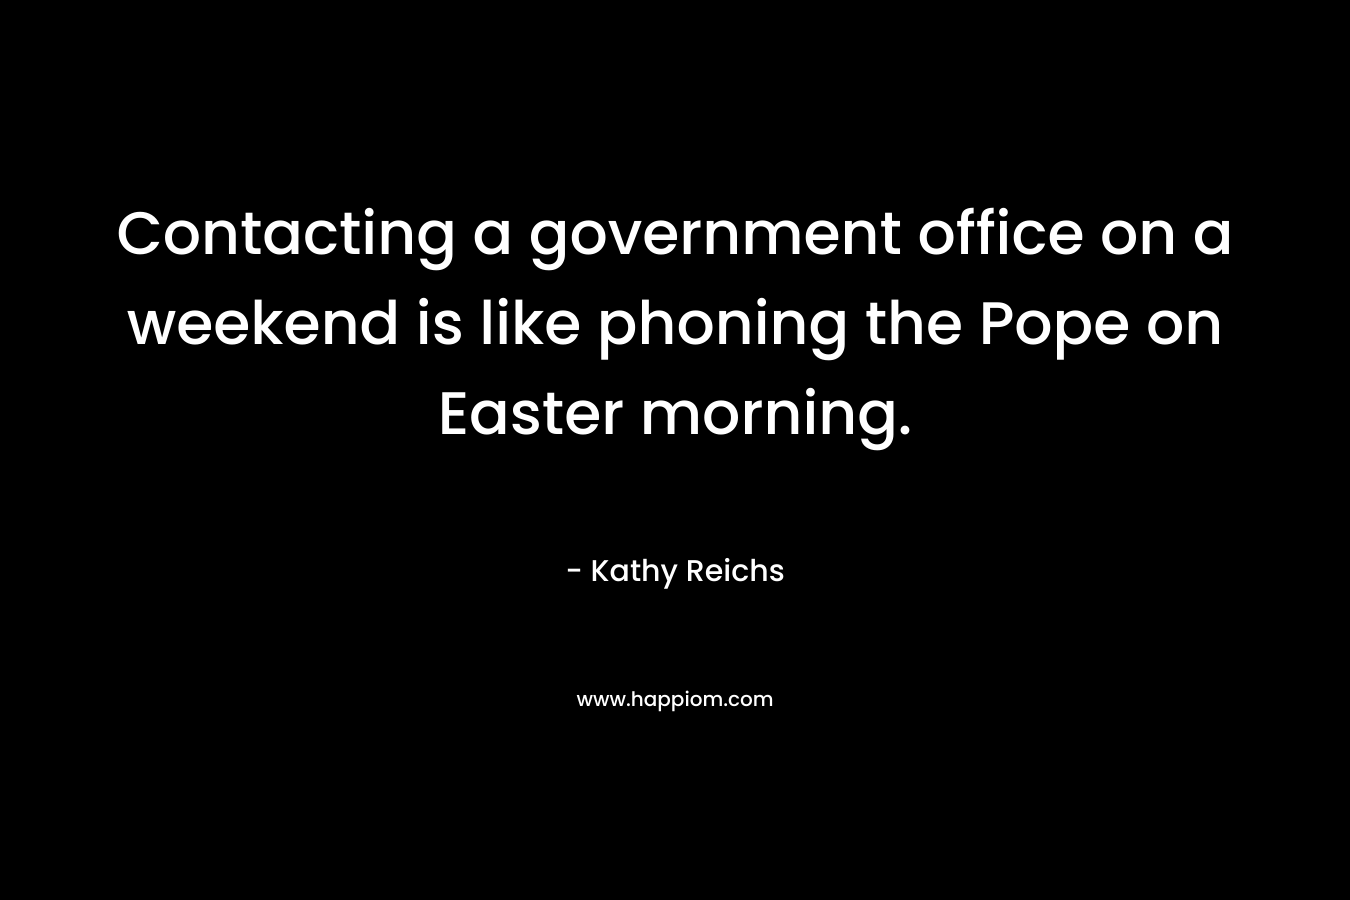 Contacting a government office on a weekend is like phoning the Pope on Easter morning. – Kathy Reichs